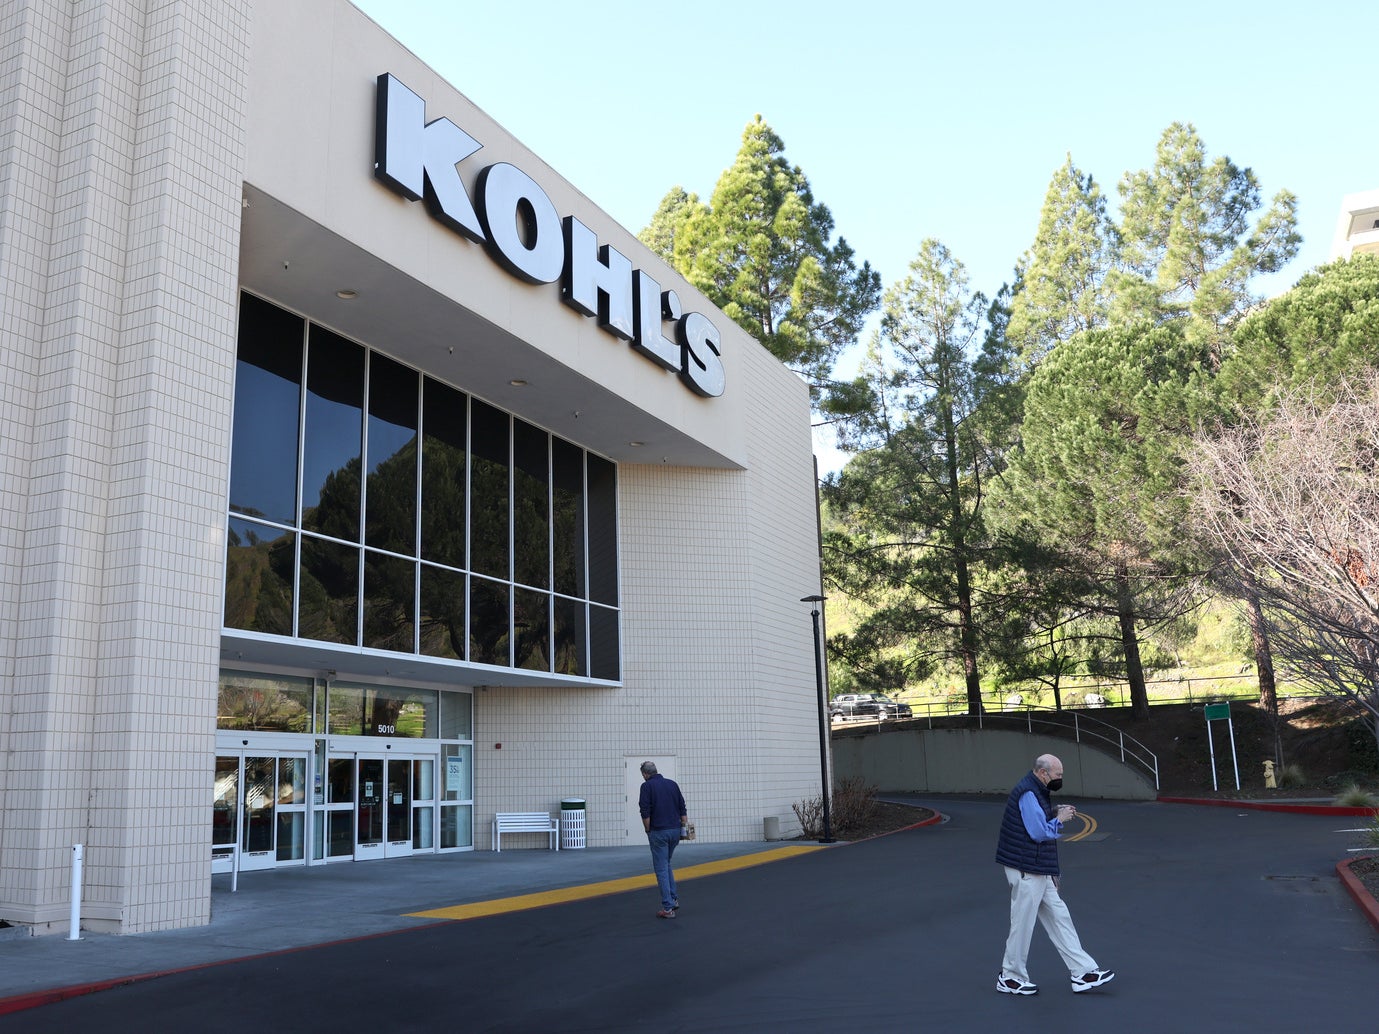 Kohl's forges ahead with slow but steady growth